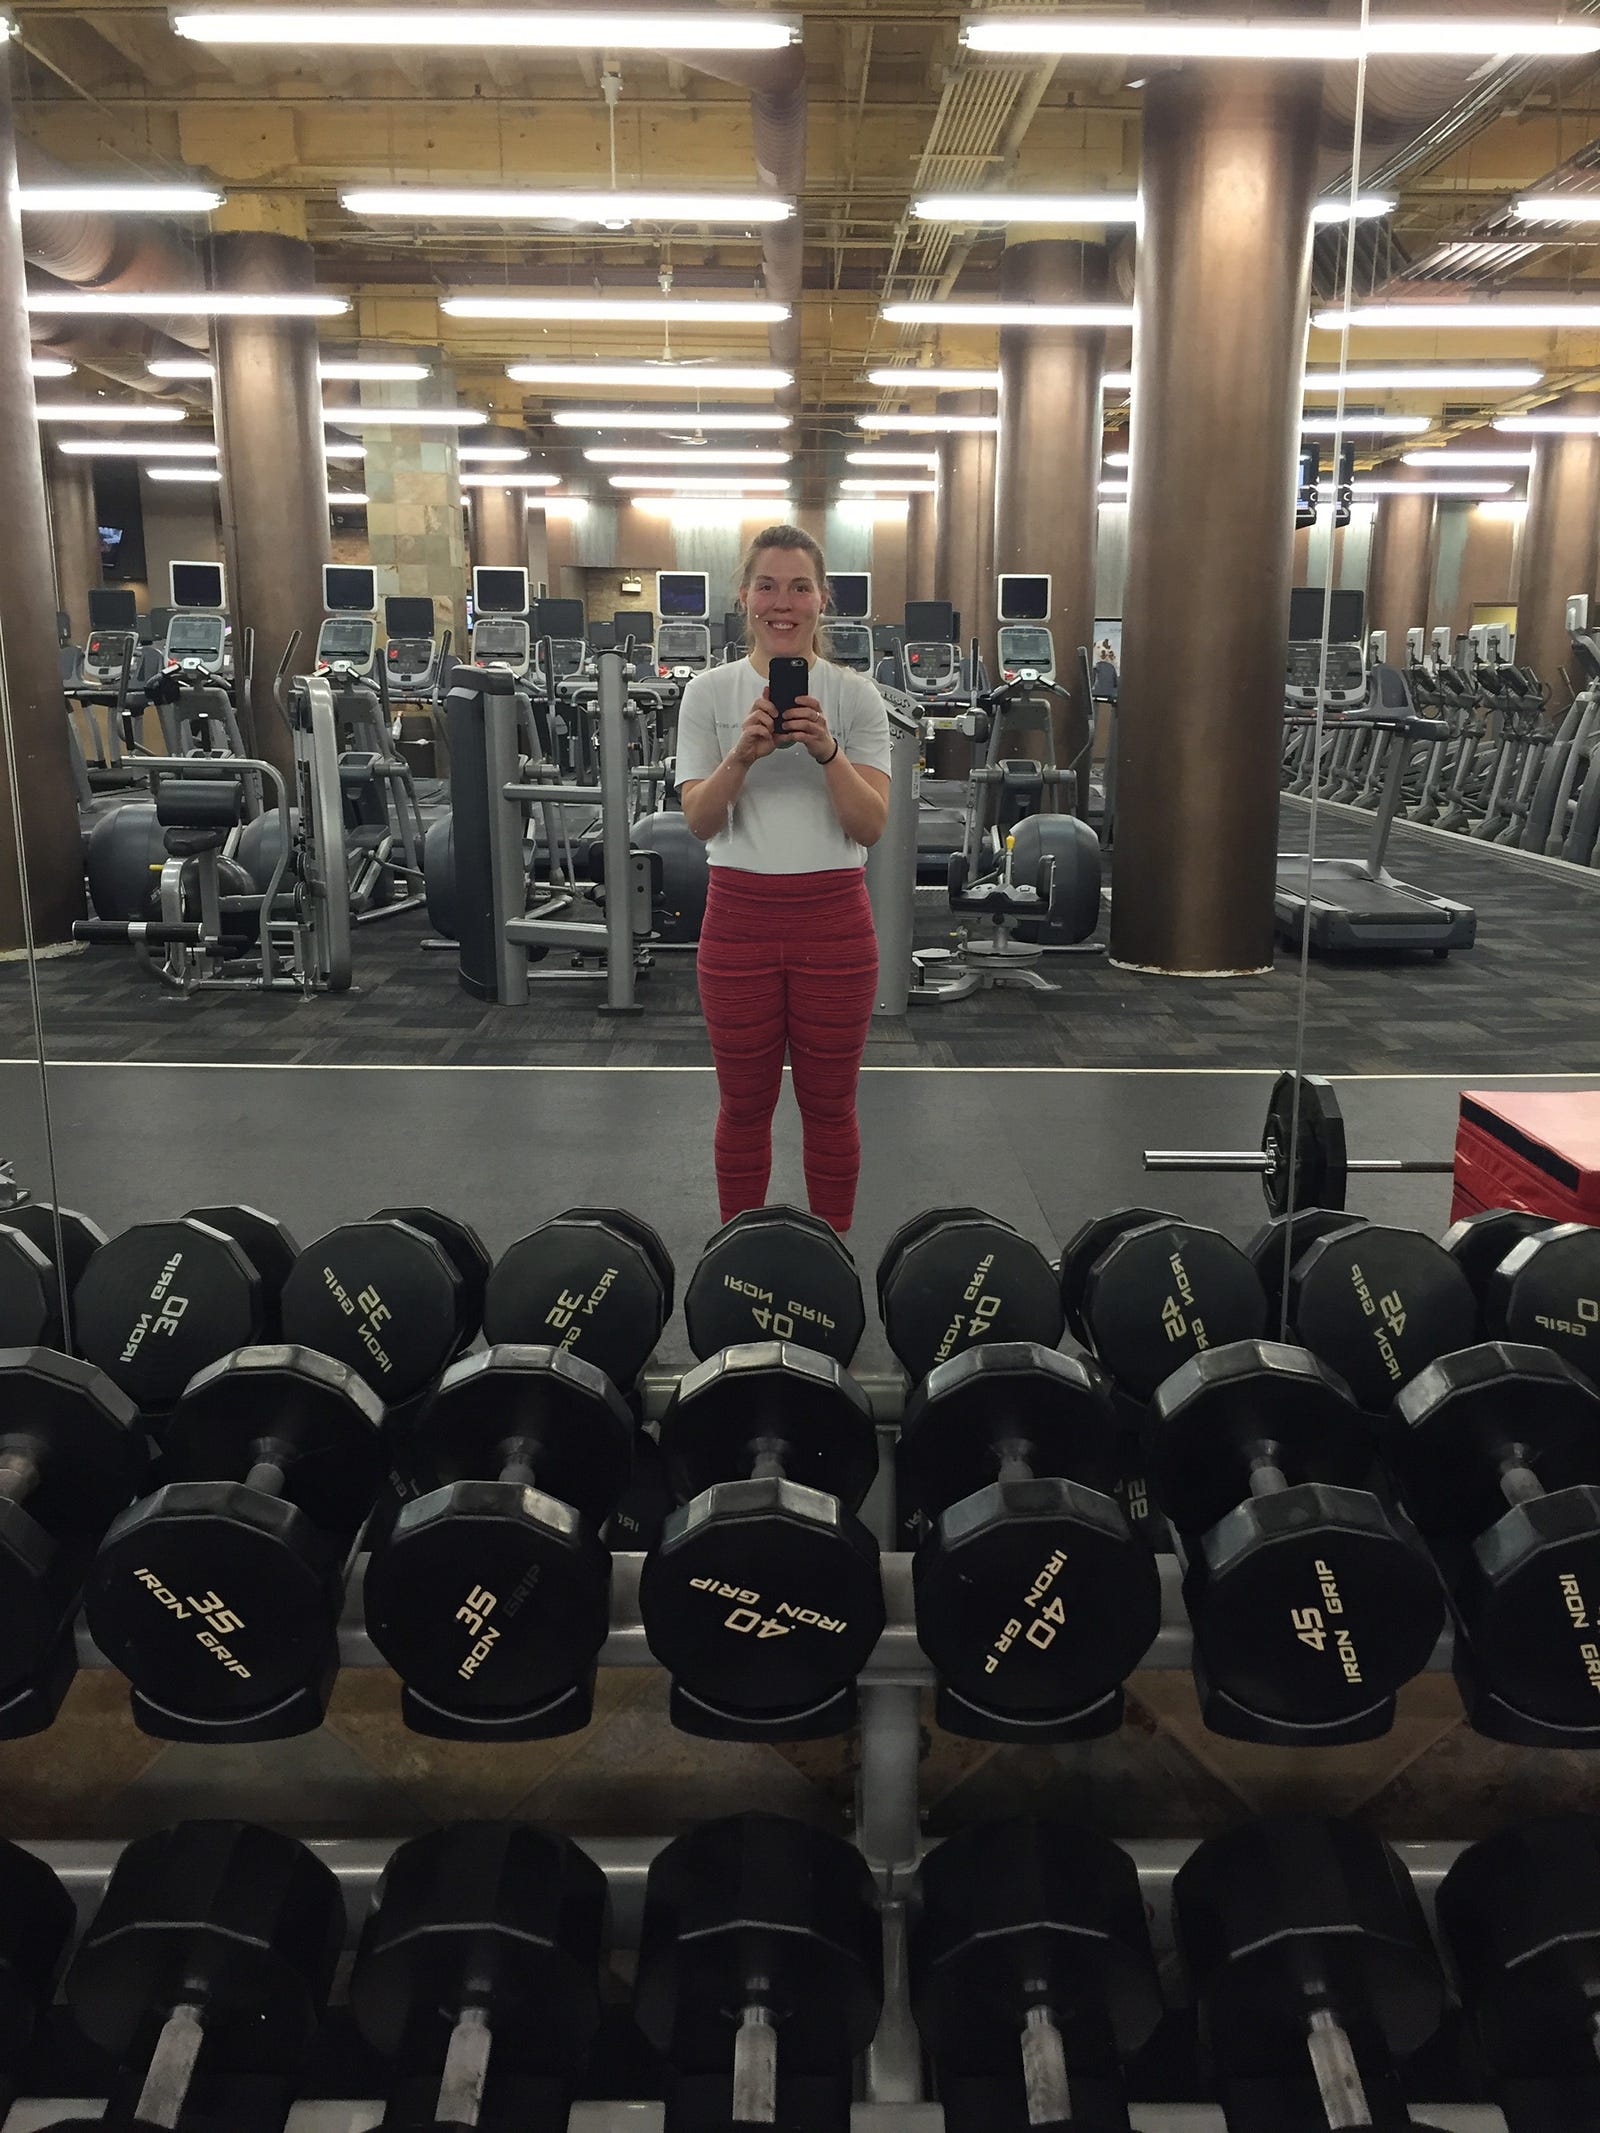 on easter i stayed at the gym for 24 hours and wrote a novella